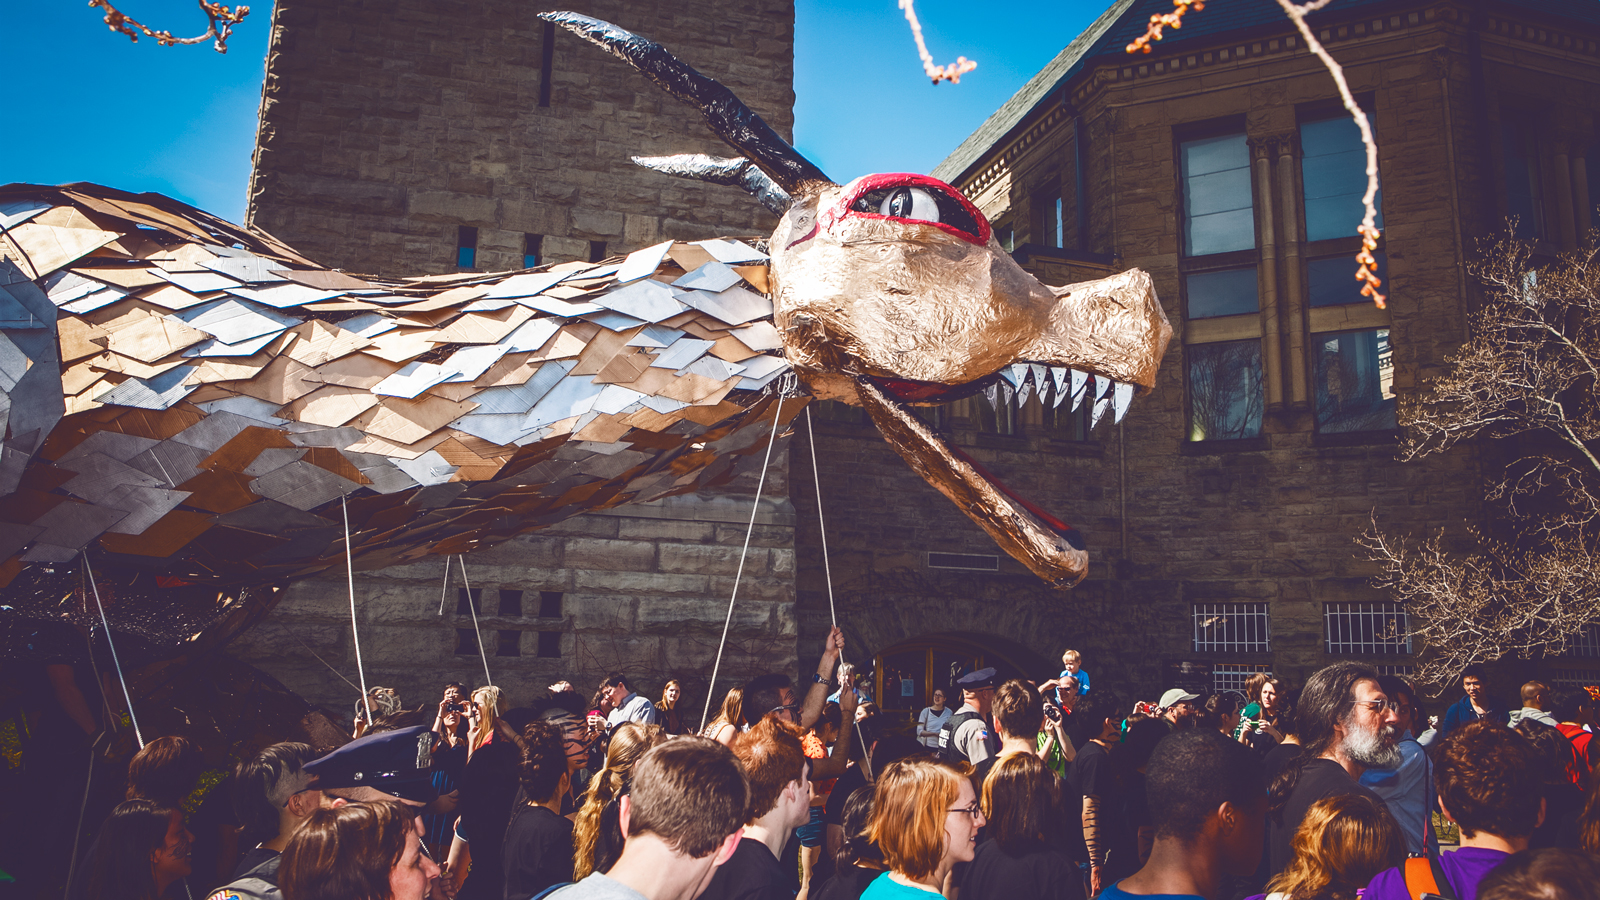 The 2010 dragon passes by McGraw Tower